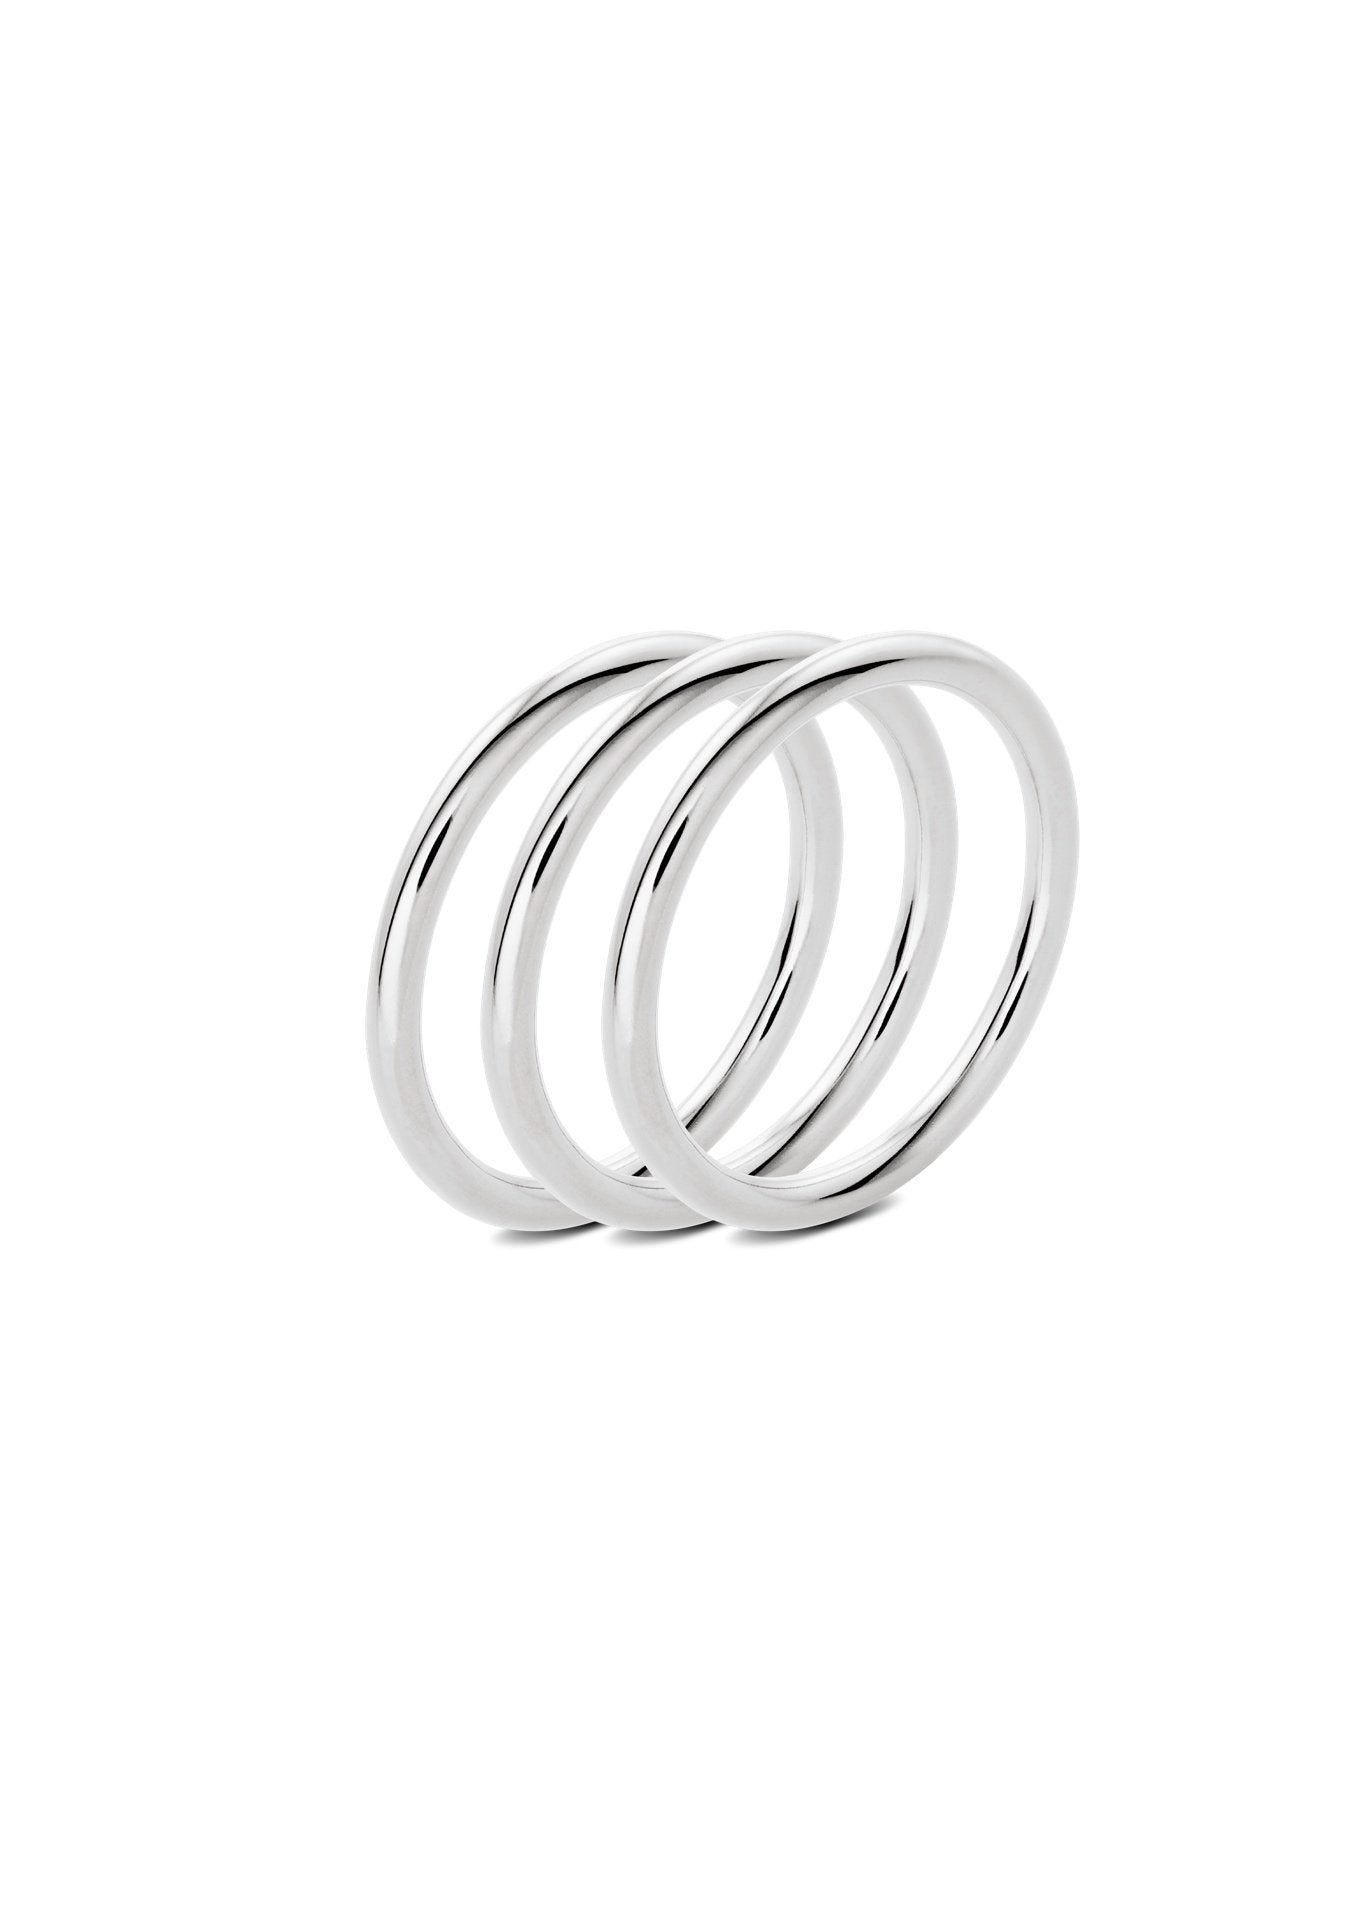 NO MORE accessories Plain Rings Stack in Sterling Silver